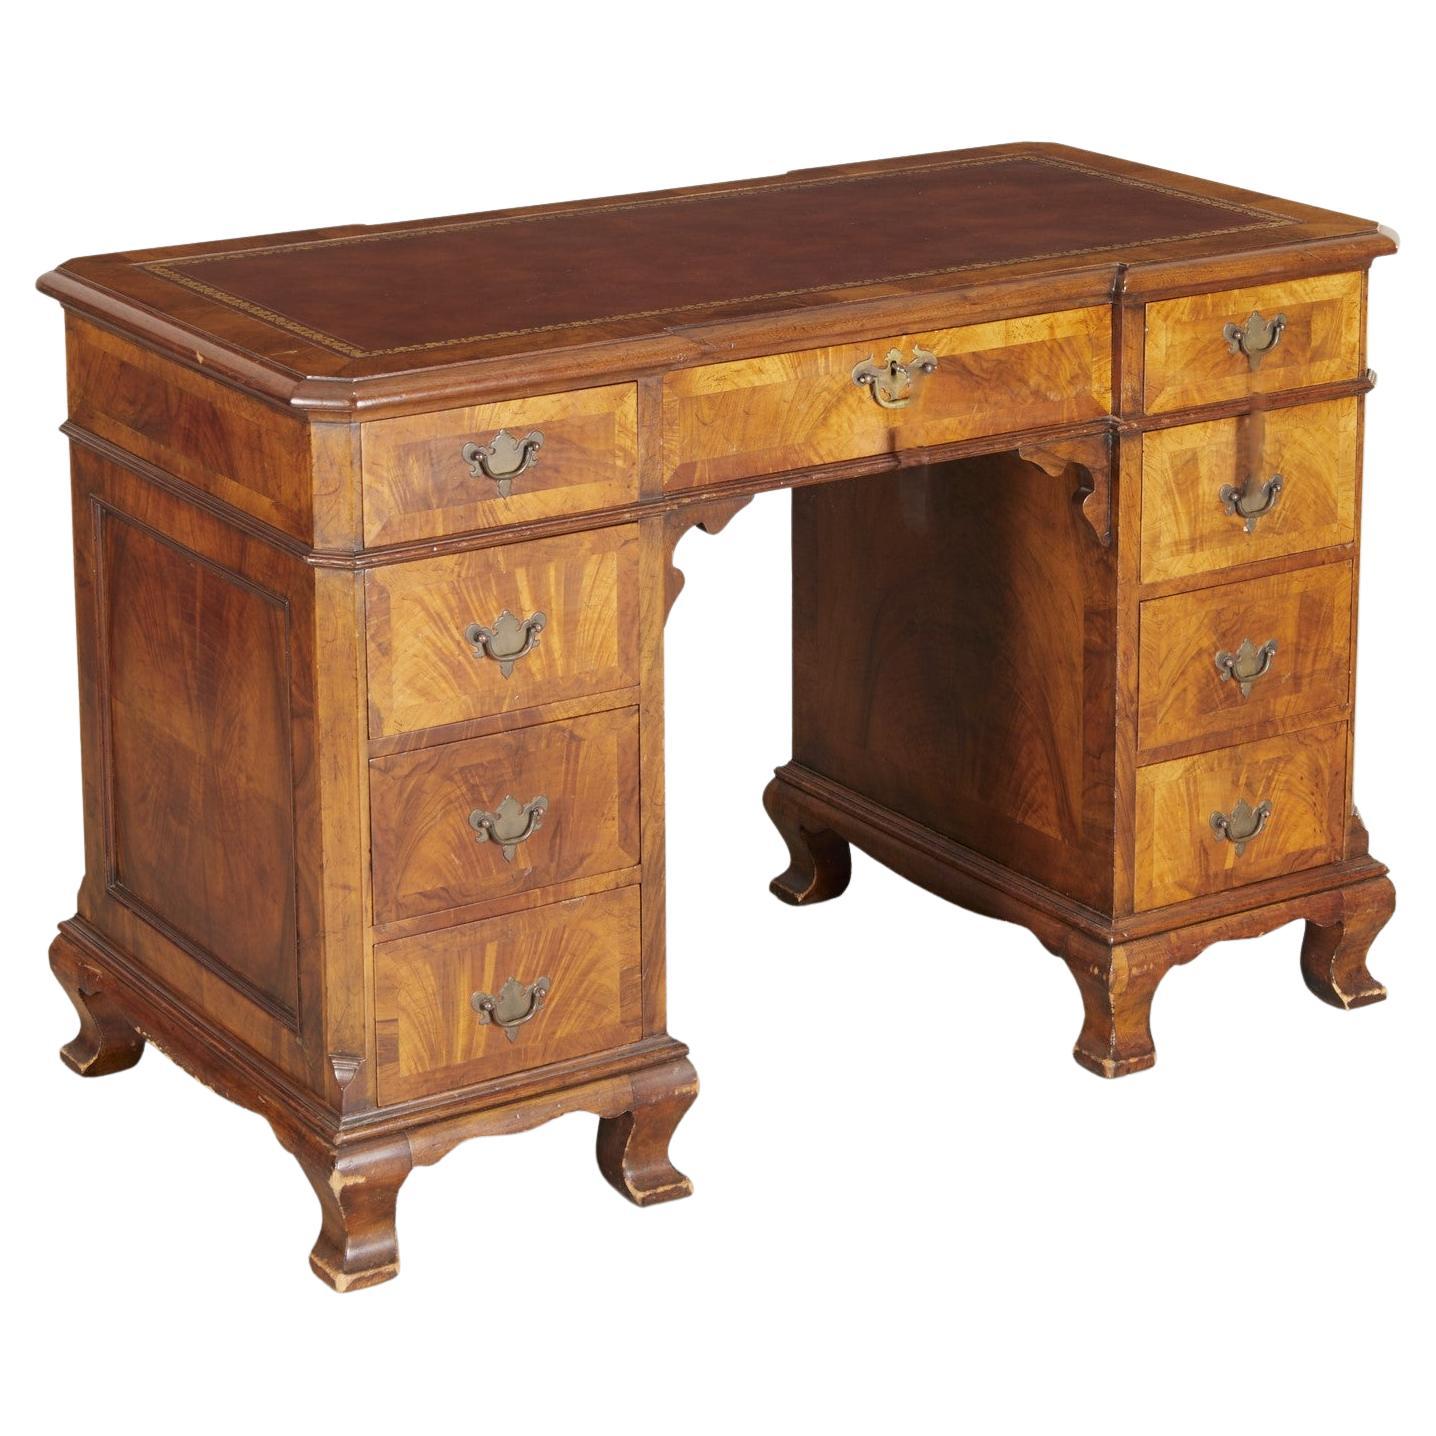 20th Century George III Style Figured Mahogany Desk with Embossed Leather Top For Sale